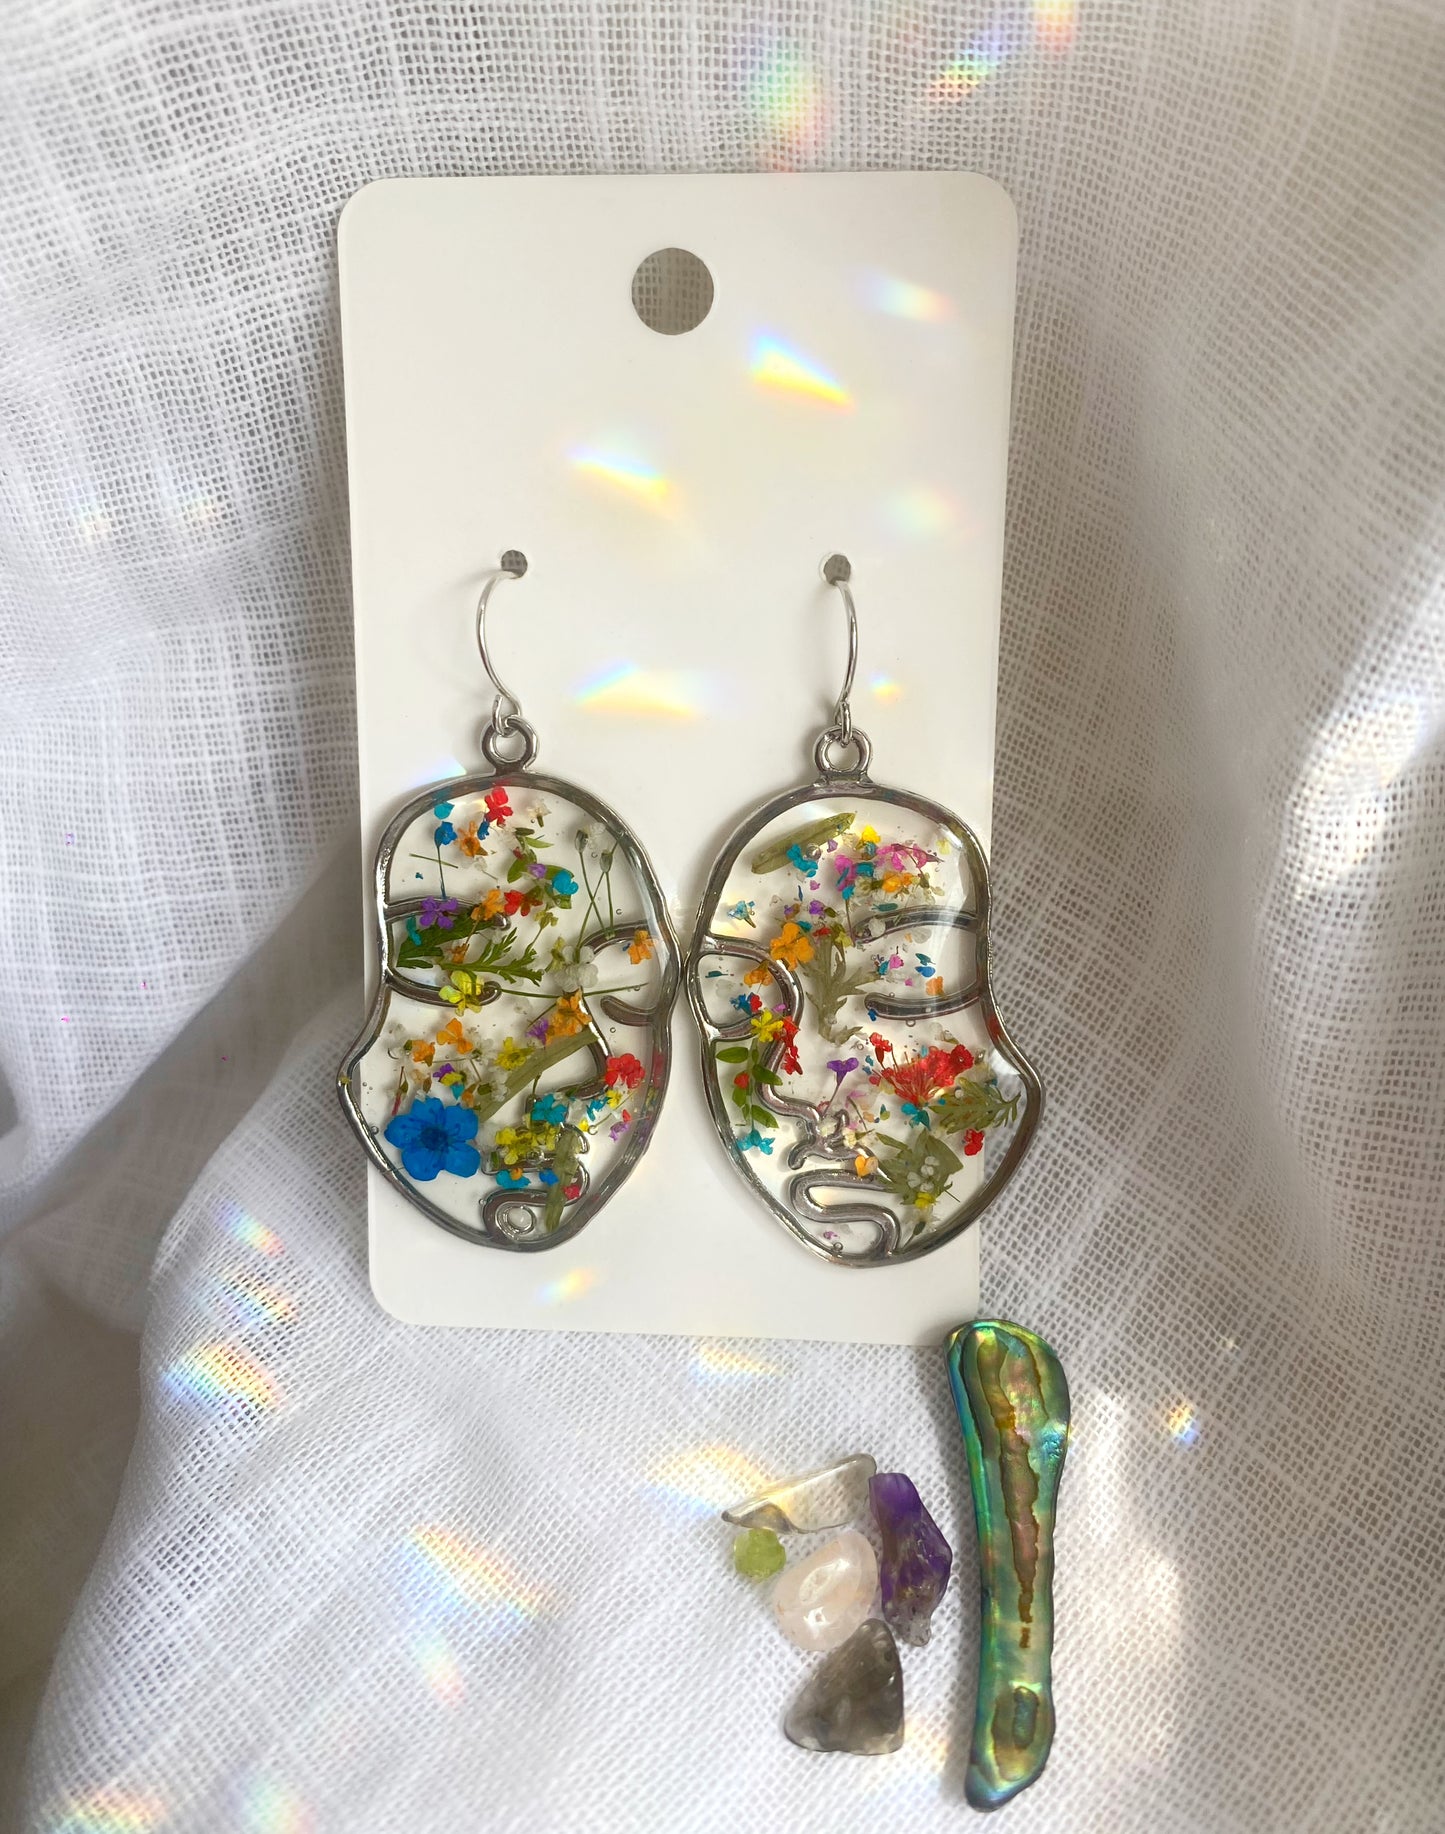 Handmade Abstract Rainbow Silver Face earrings. Made with Queen Anne’s lace flowers. 14K white gold plated.